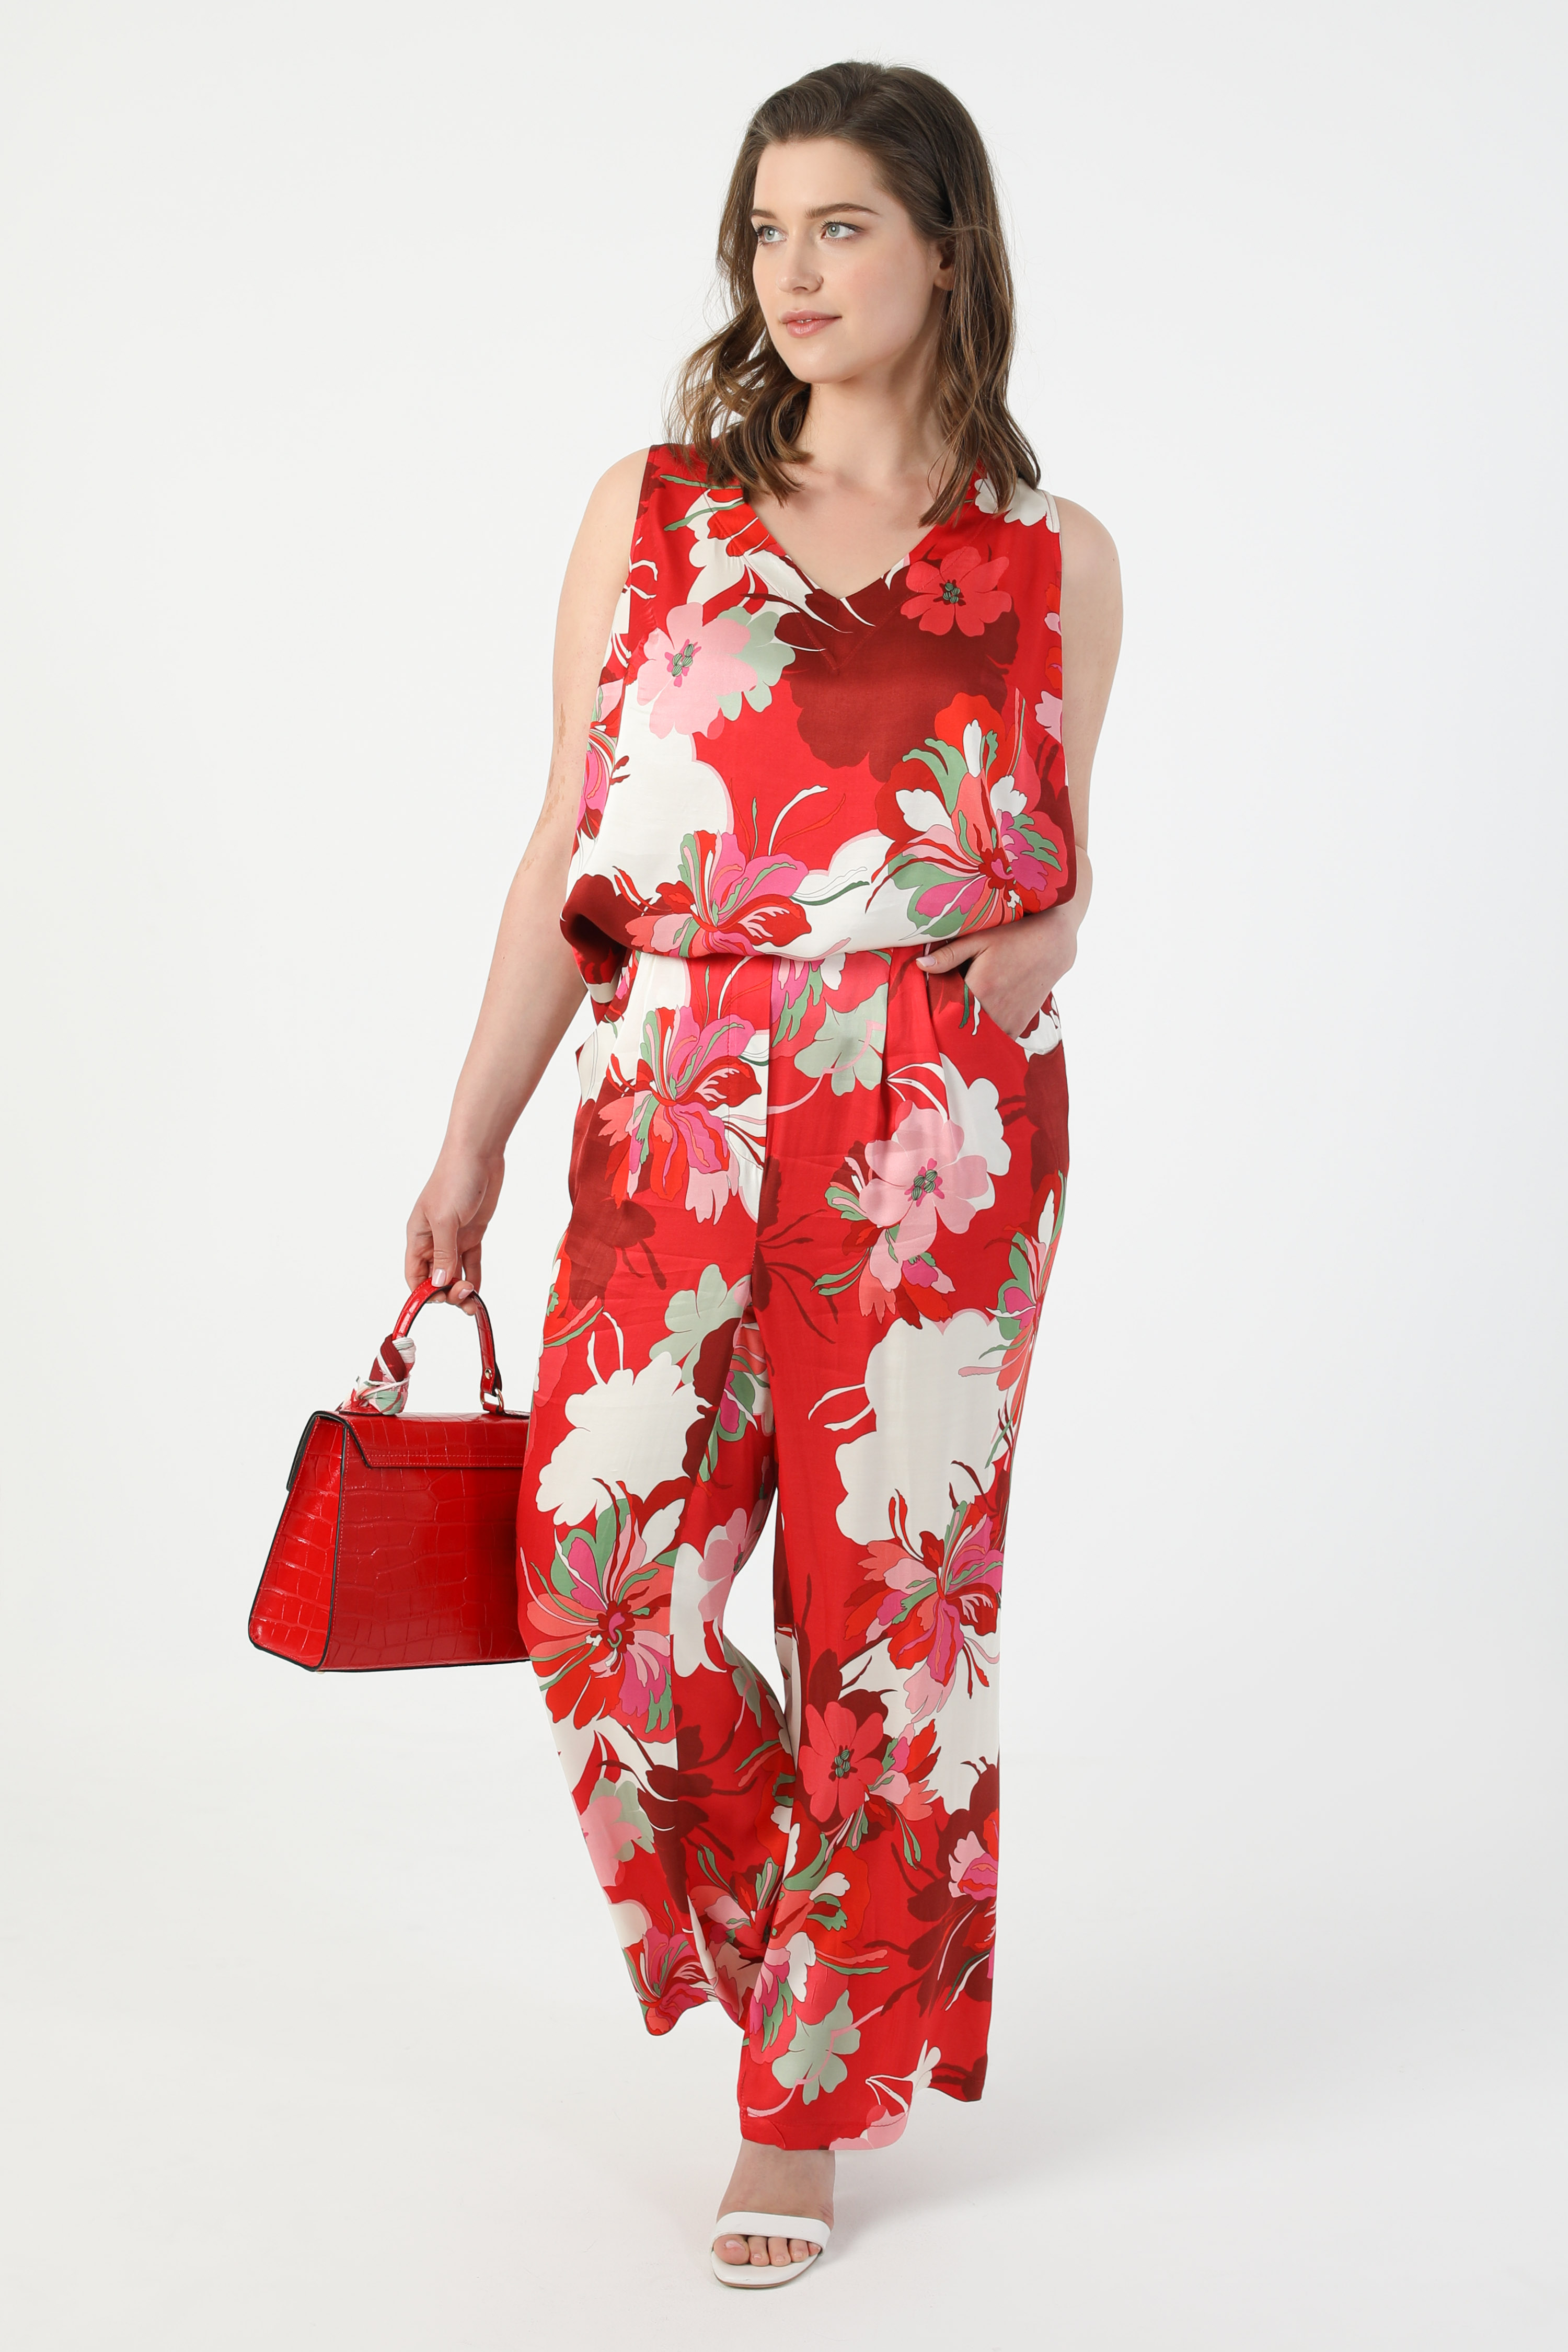 Flowing satin floral print trousers in eco-responsible fabrics